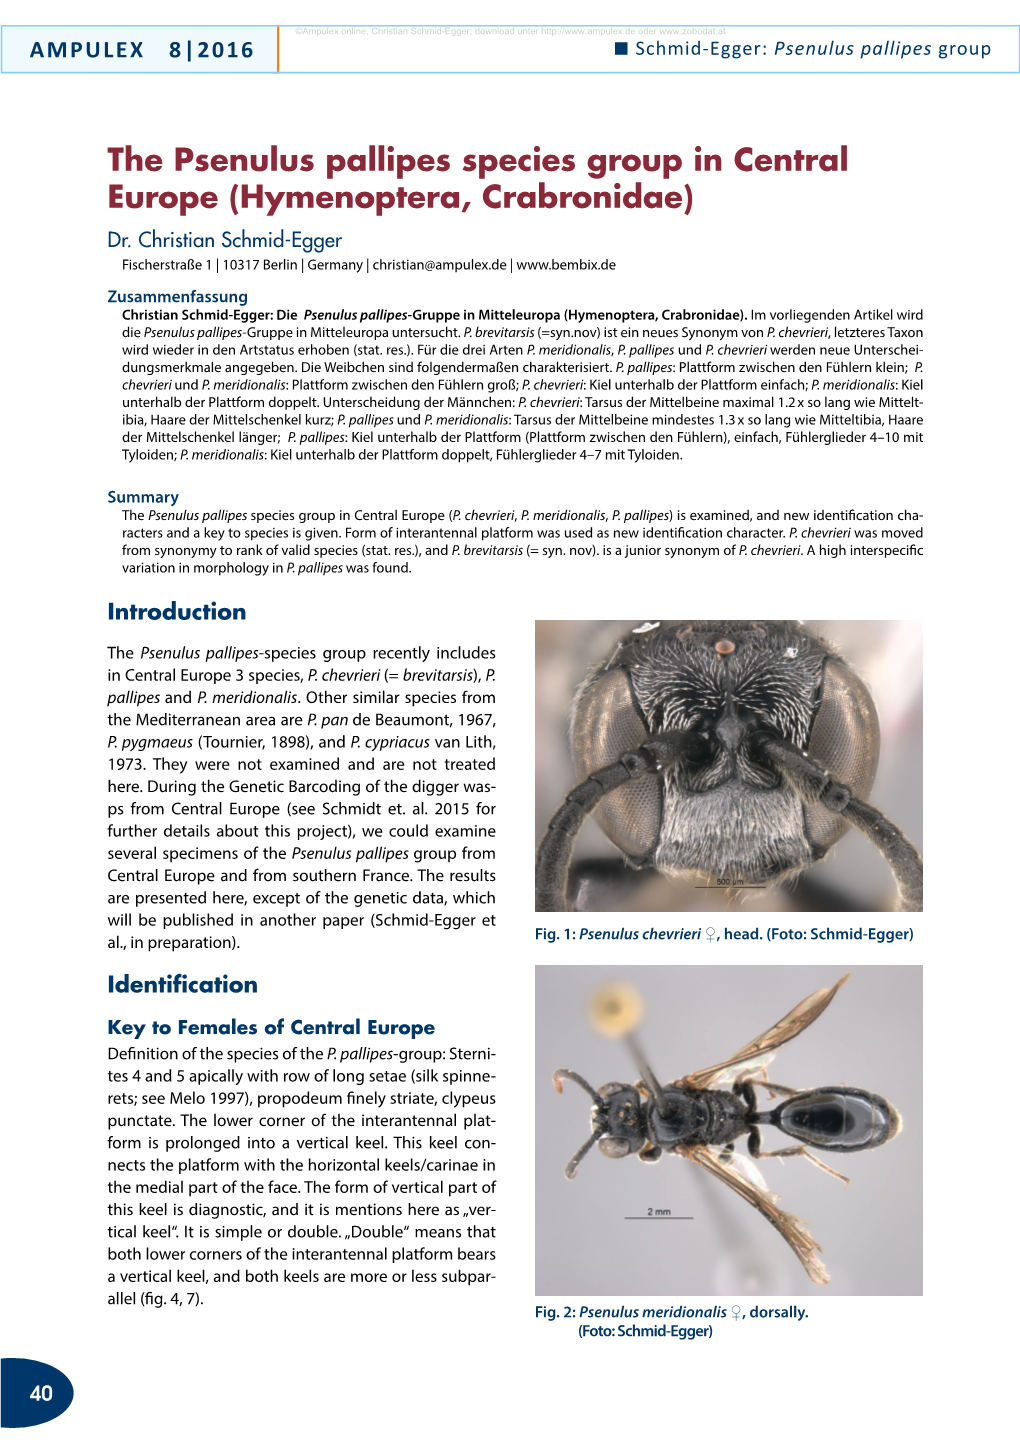 The Psenulus Pallipes Species Group in Central Europe (Hymenoptera, Crabronidae) Dr